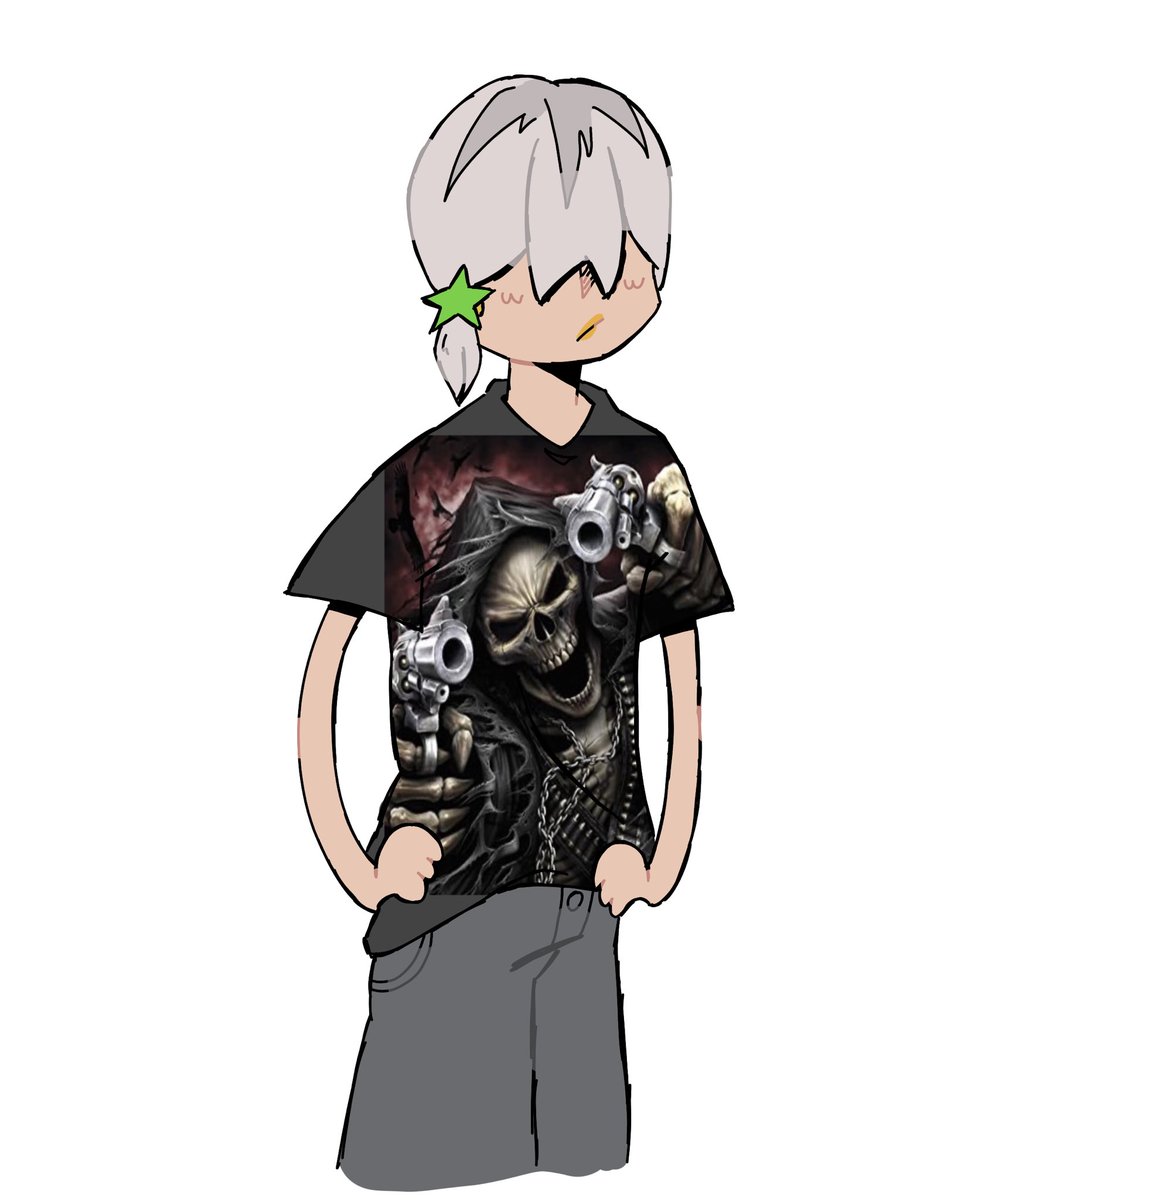 jodio with awesome epic skeleton tshirt do you guys understand me